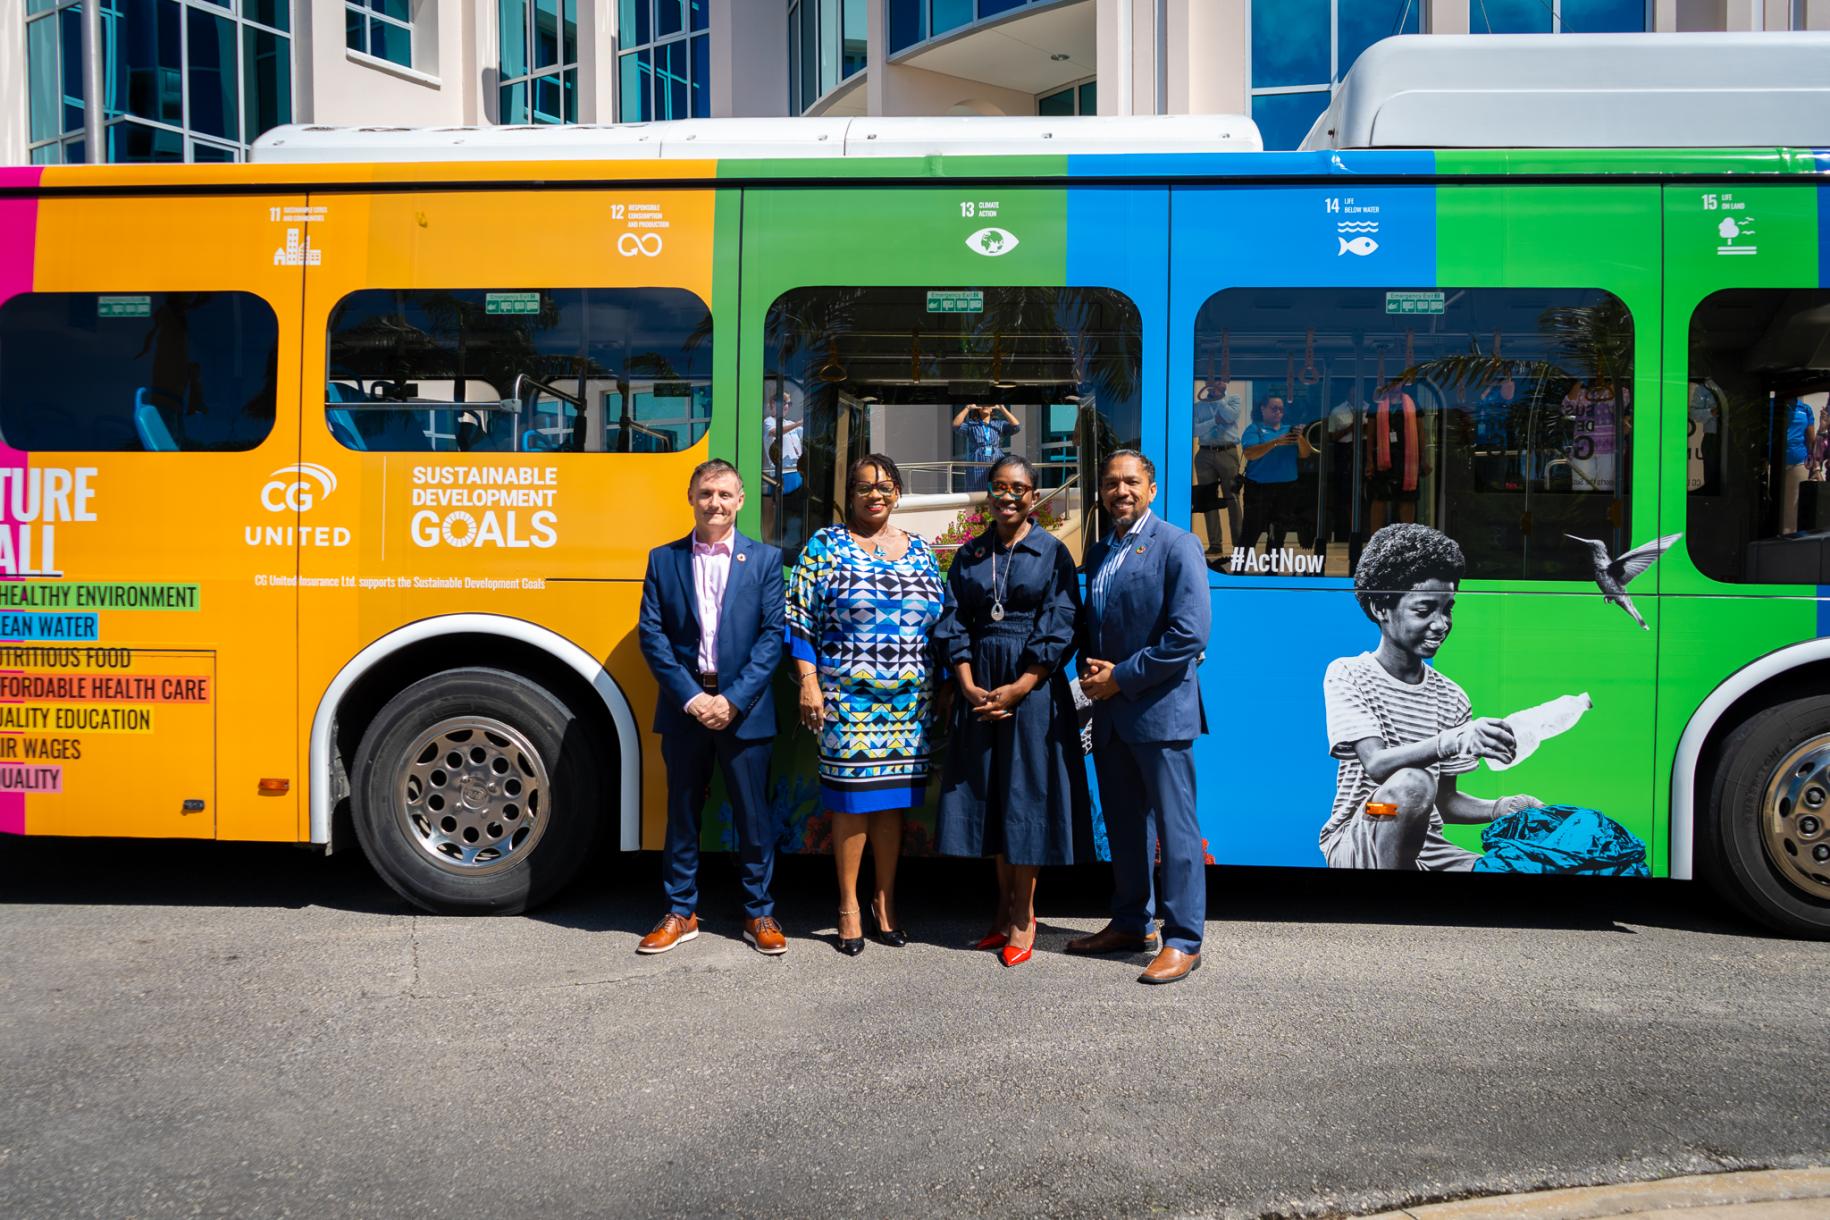 Four people, two men and two women in dark suits stand in front of a multicoloured bus